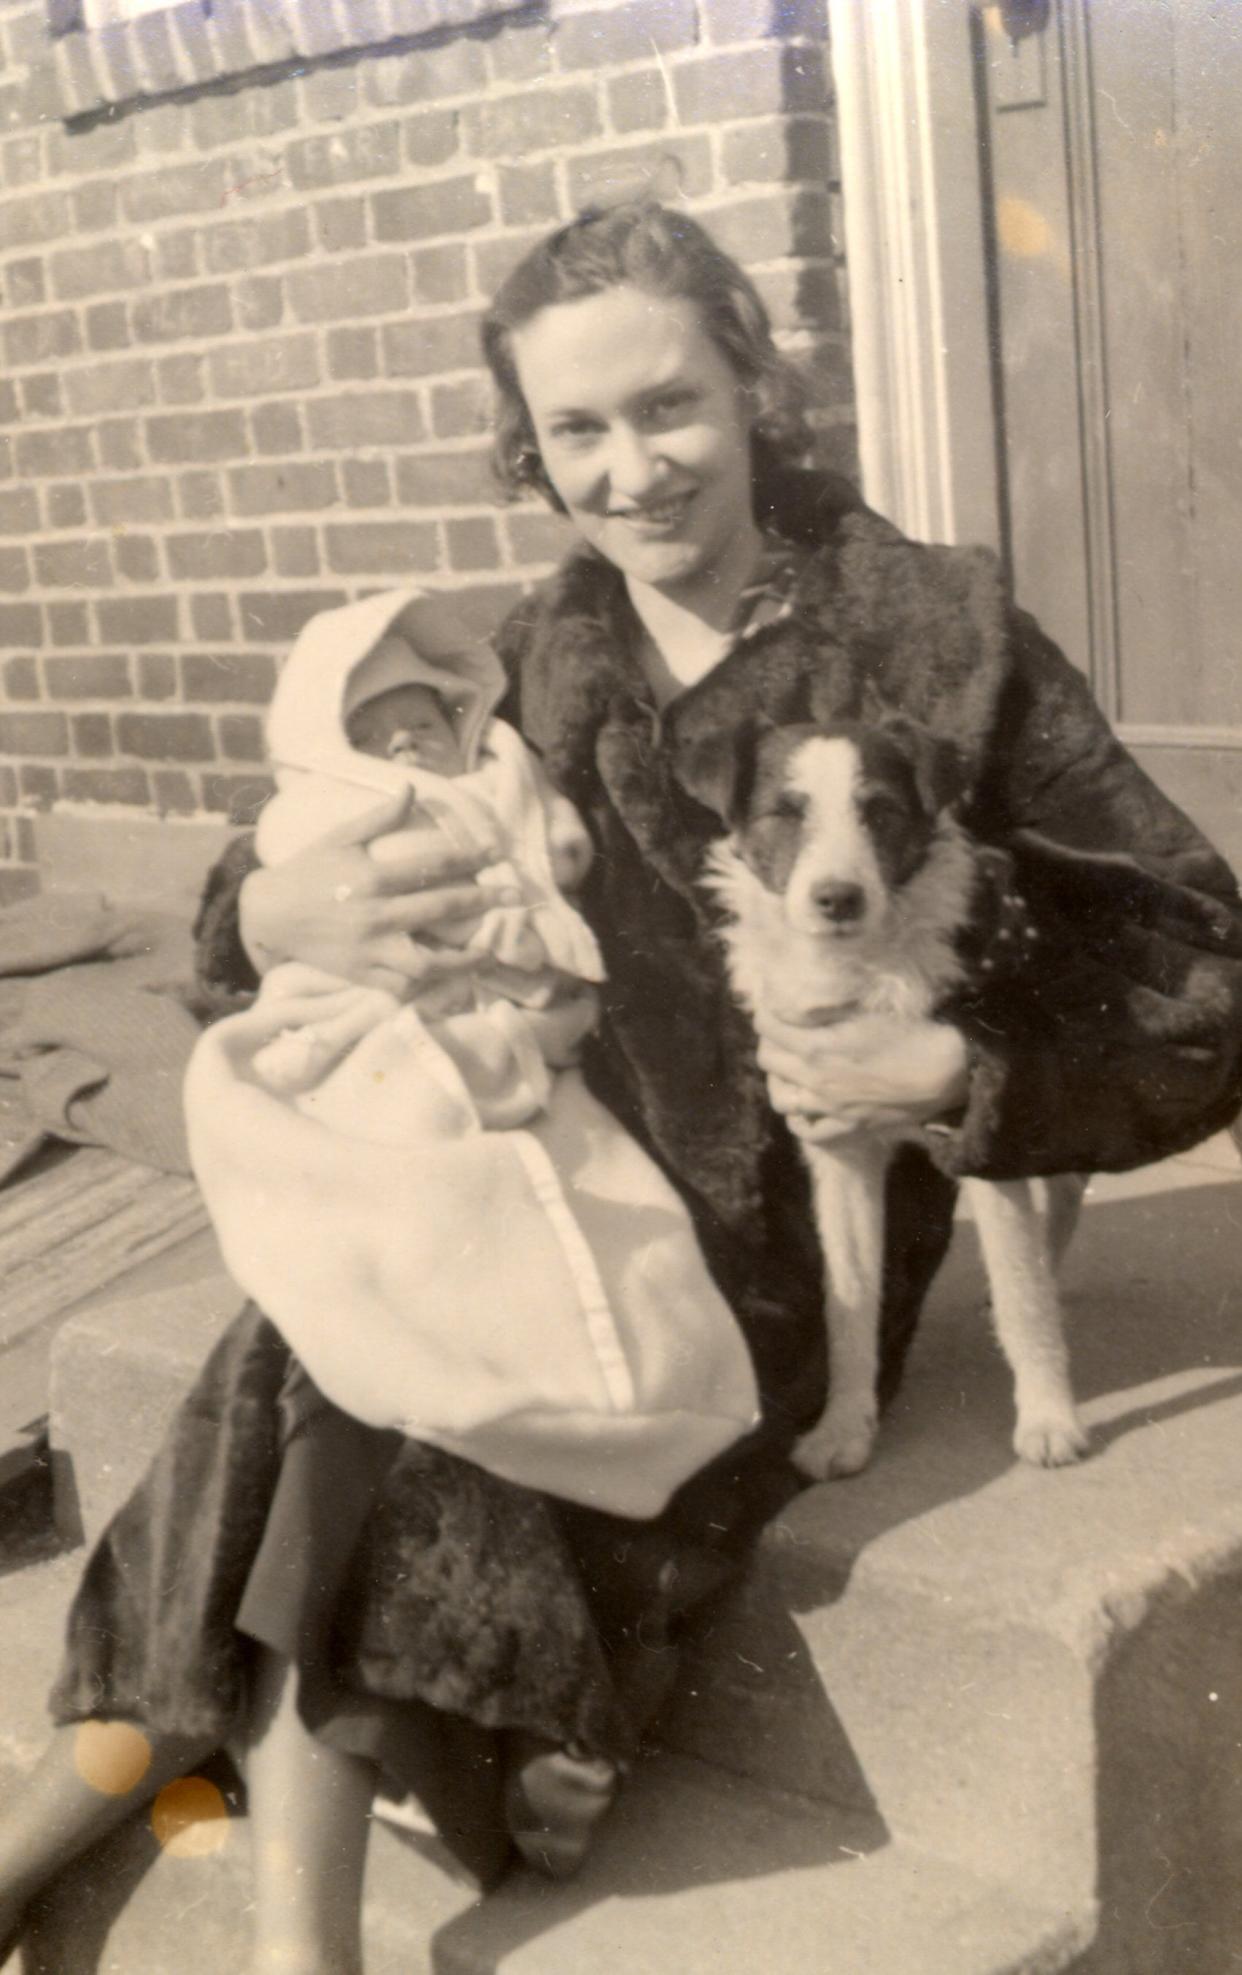 Marie Leonard MacDonald (1912-1989) poses in 1938 at her house on Raleigh Way in Atlantic Heights with son Kenny, 5 1/2 months, and dog Kimmie.